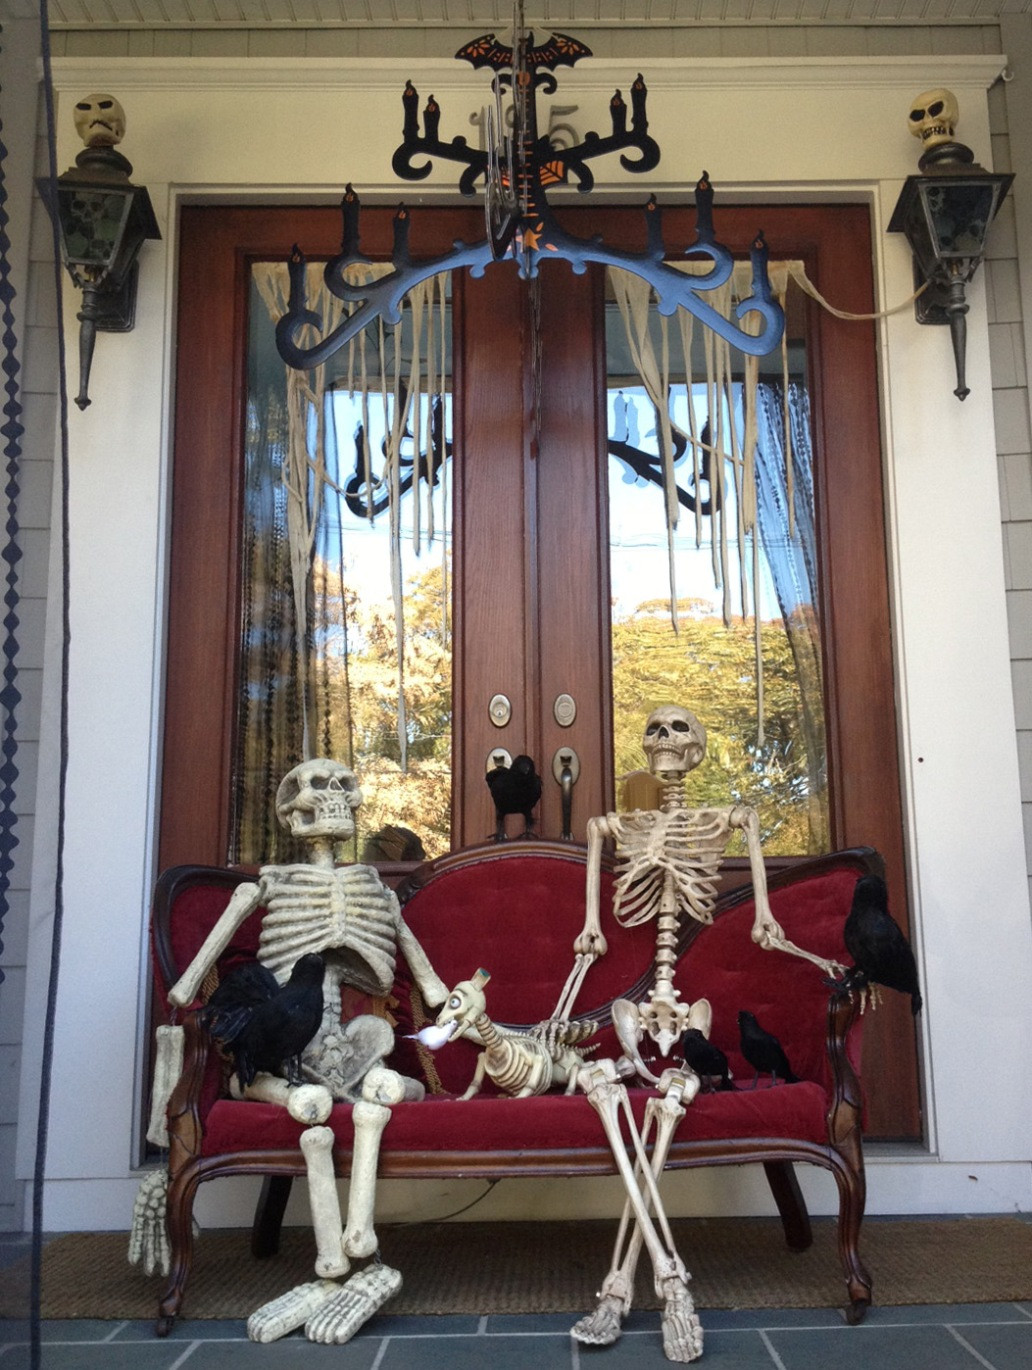 Porch Decorations For Halloween
 Cute Halloween Front Porch Decorations to Greet Your Guests